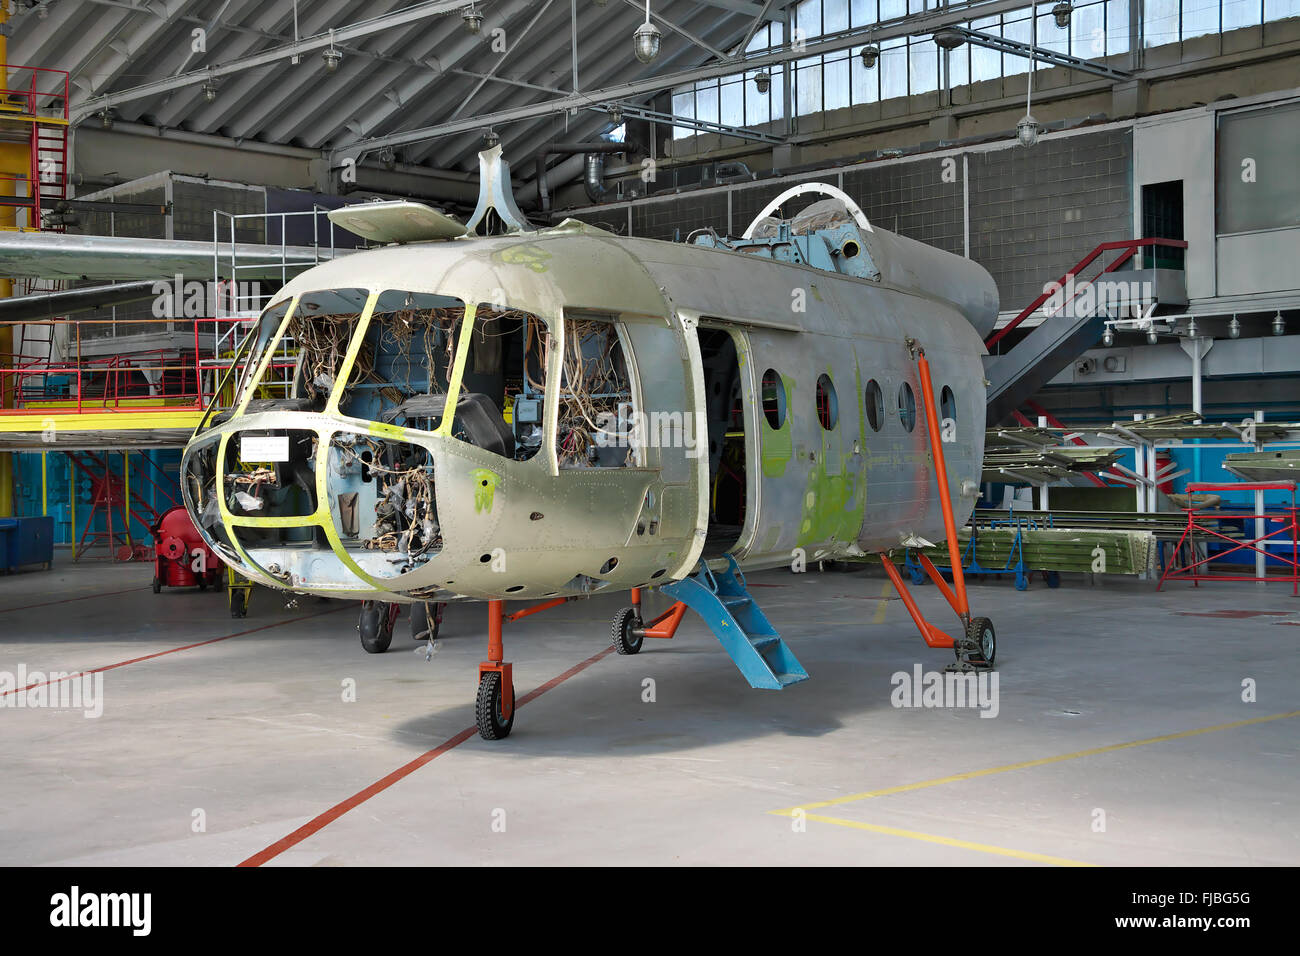 Kiev, Ukraine - July 7, 2012: Mi-8 helicopter during maintencance and repair at the service hangar Stock Photo